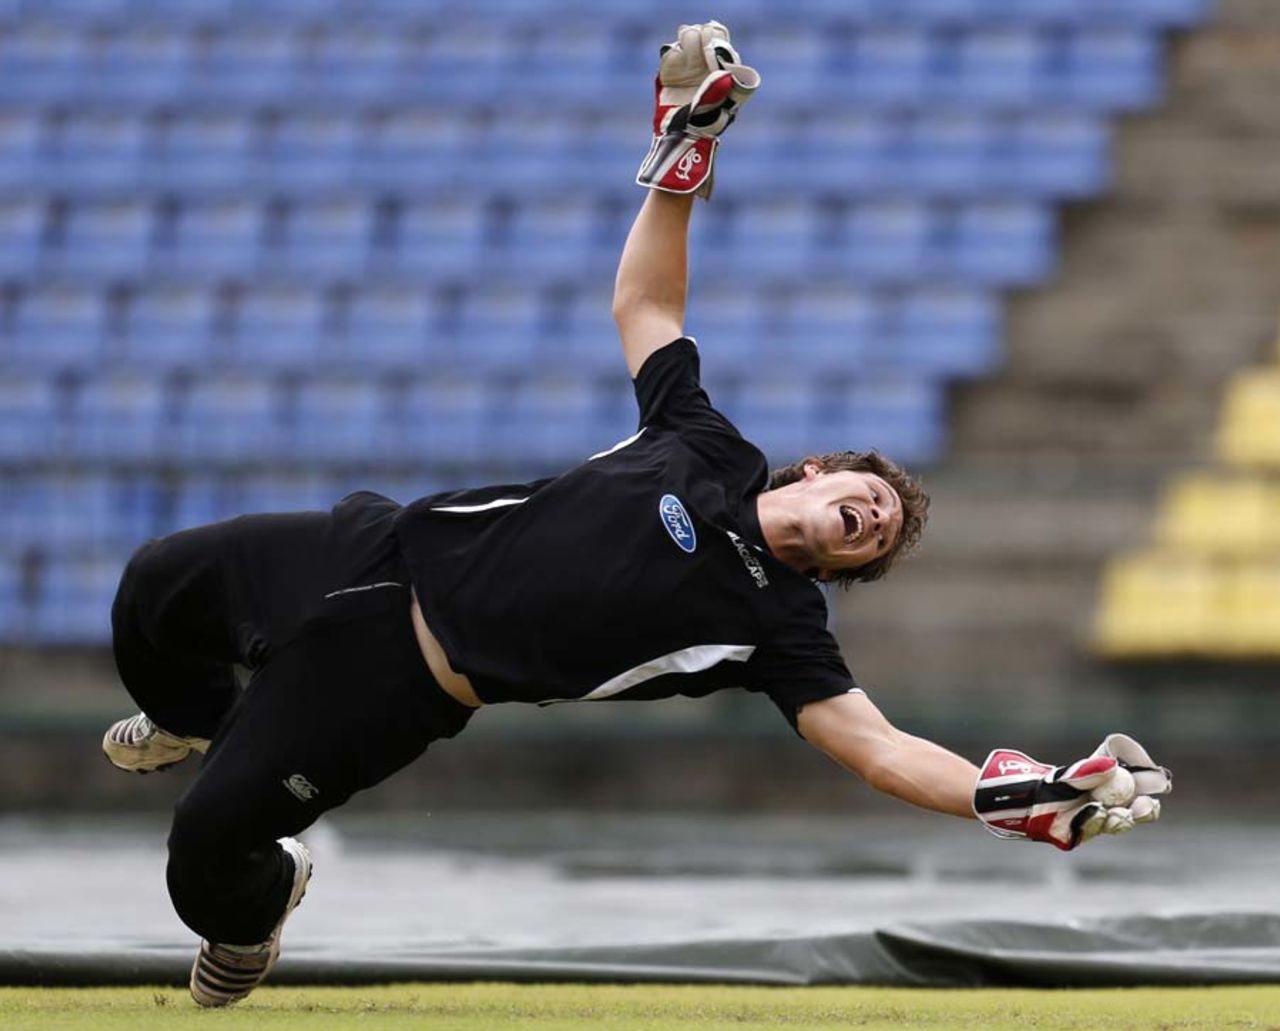 BJ Watling dives to take a catch during practice, Pellekele, October 31, 2012